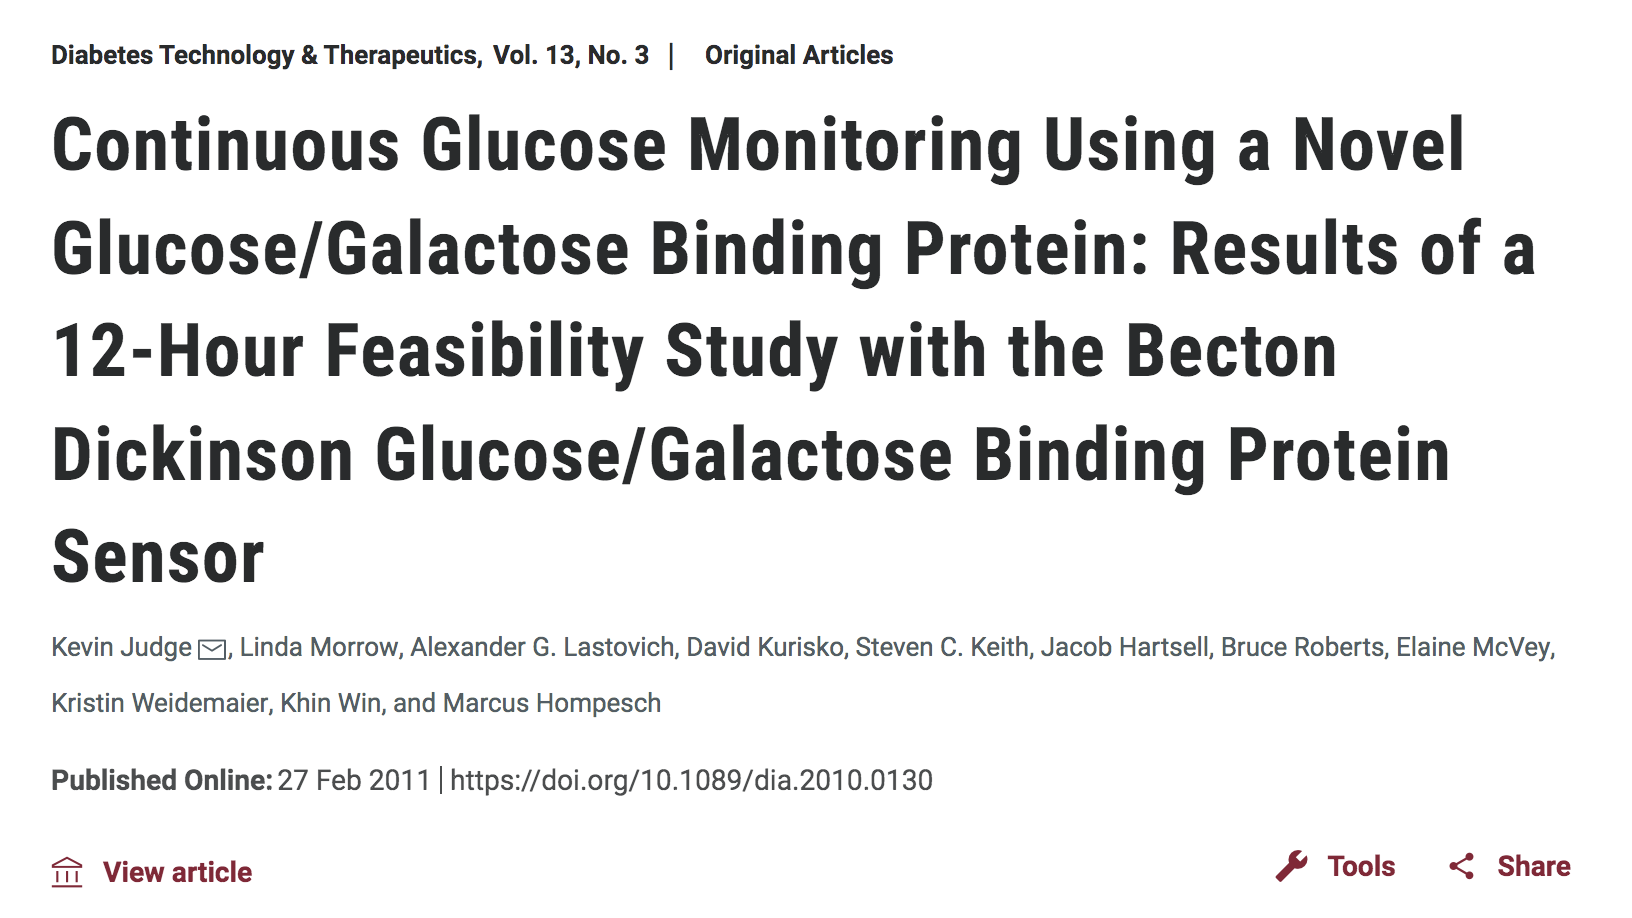 image of Continuous glucose monitoring using a novel glucose/galactose binding protein: results of a 12-hour feasibility study with the becton dickinson glucose/galactose binding protein sensor